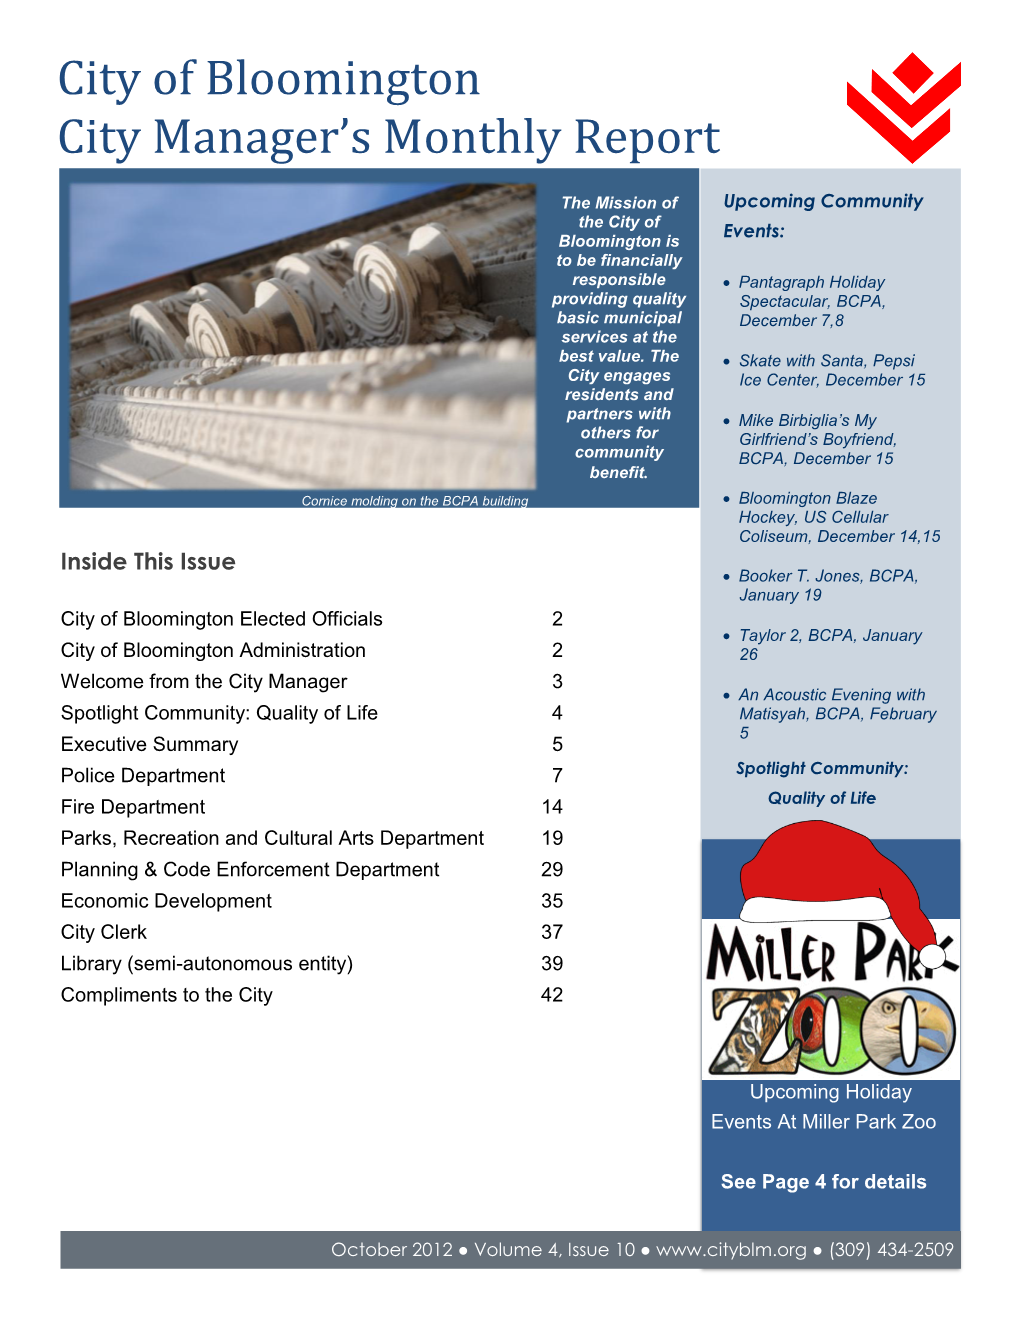 City of Bloomington City Manager's Monthly Report